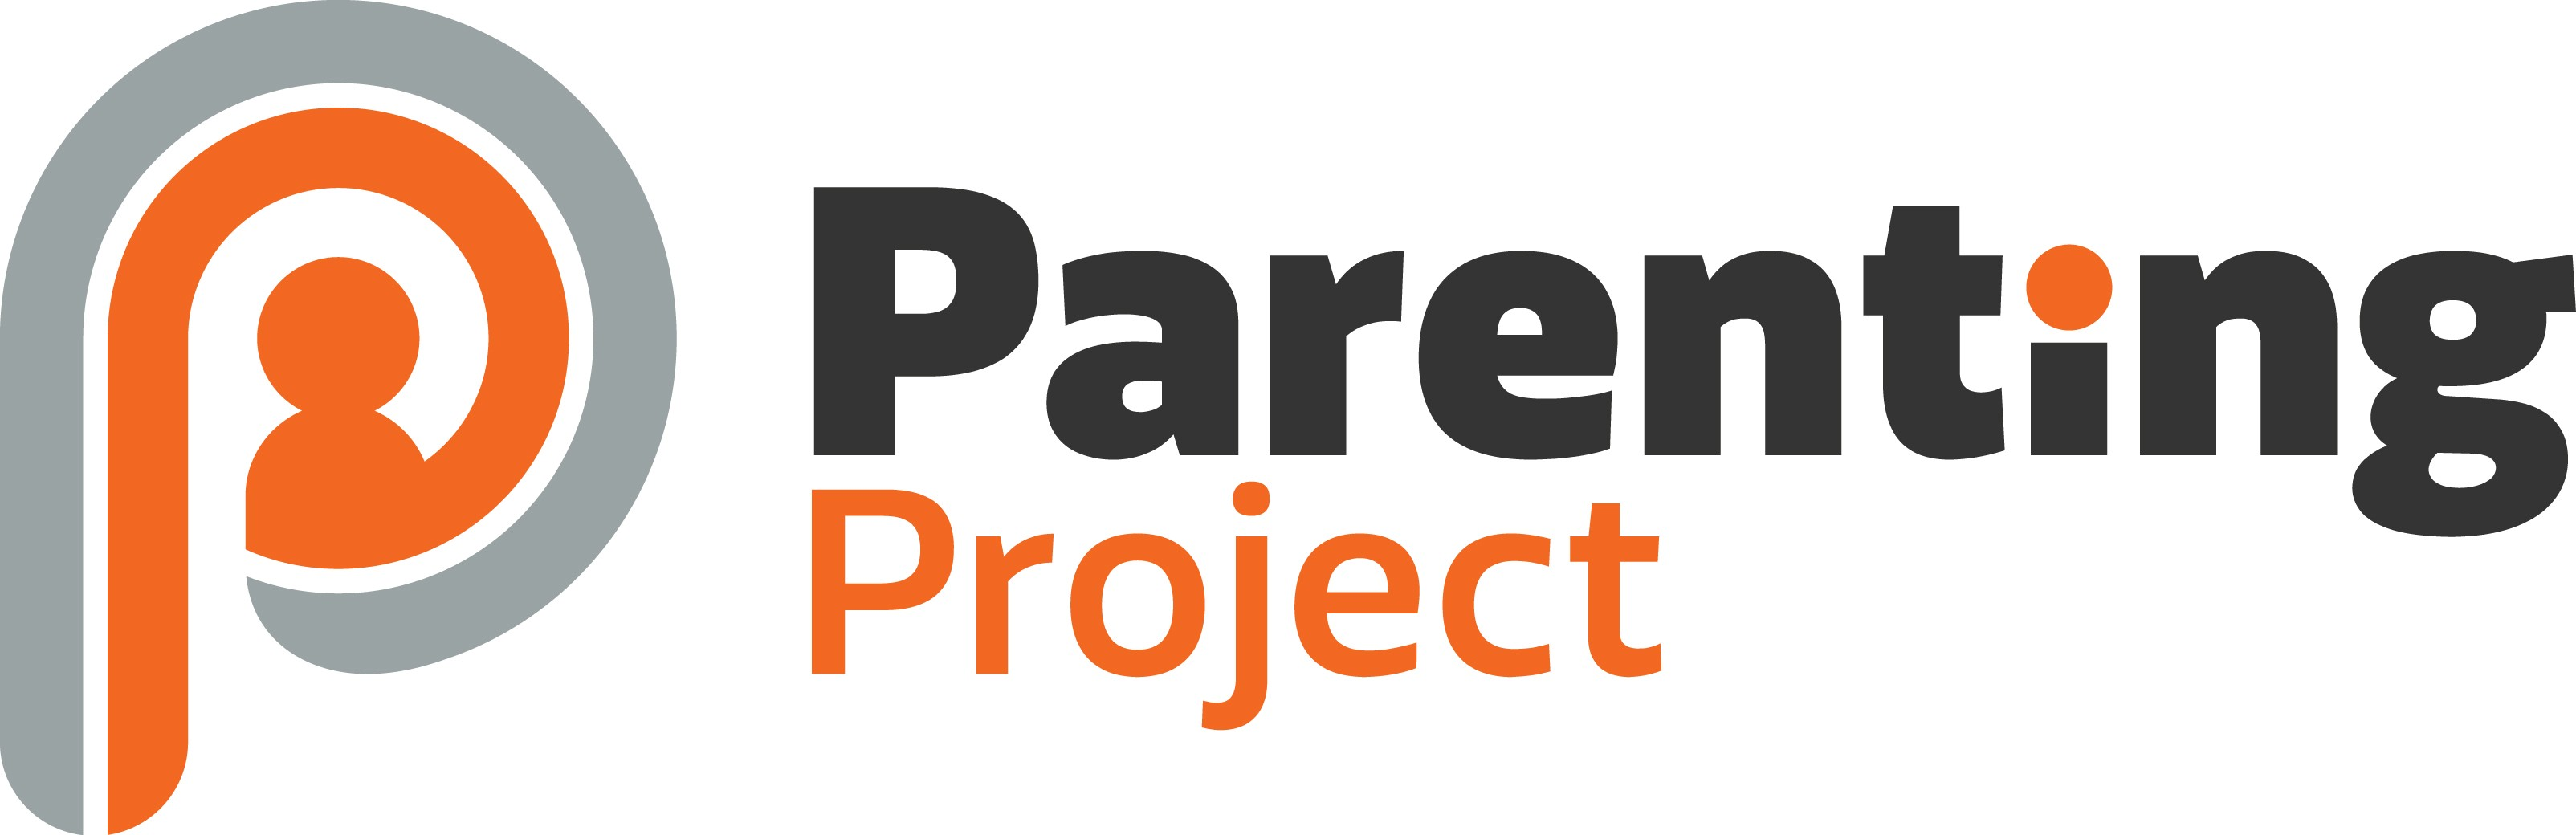 The Parenting Project 